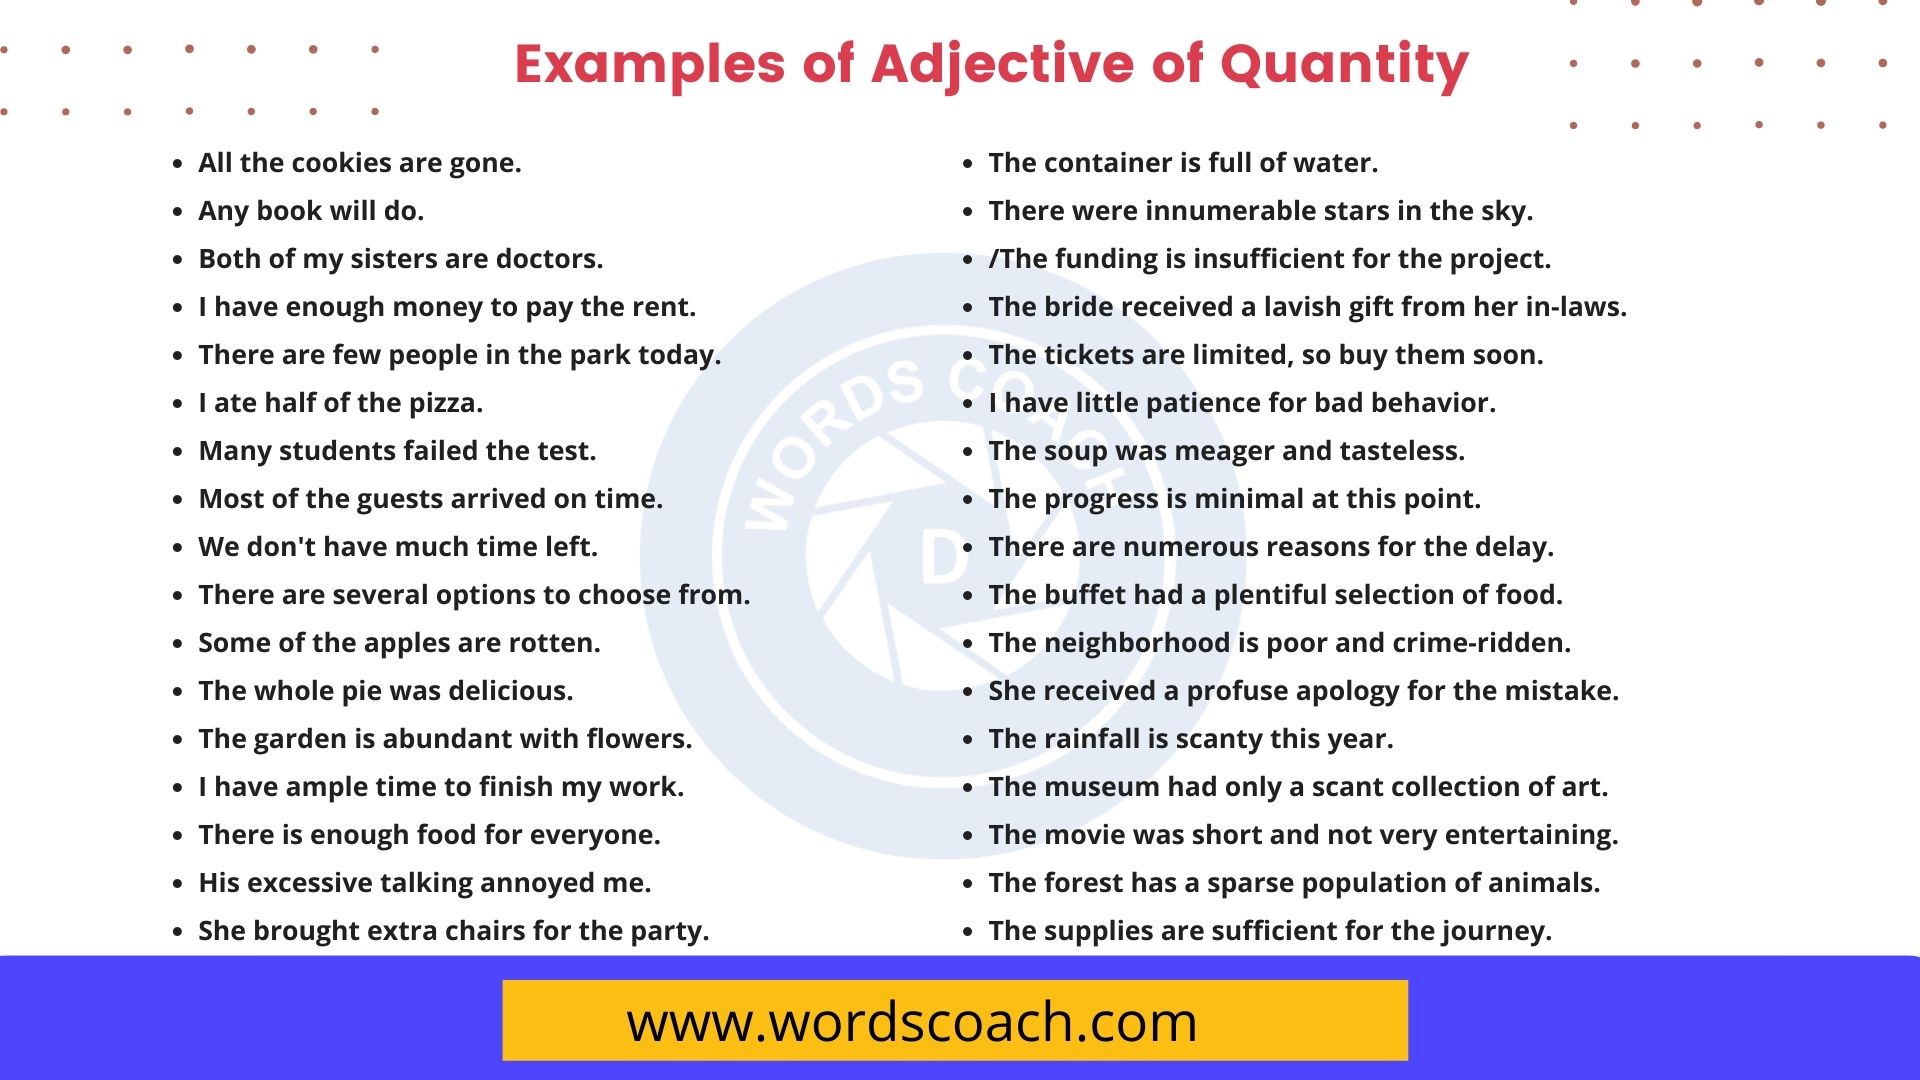 100-examples-of-adjective-of-quantity-word-coach